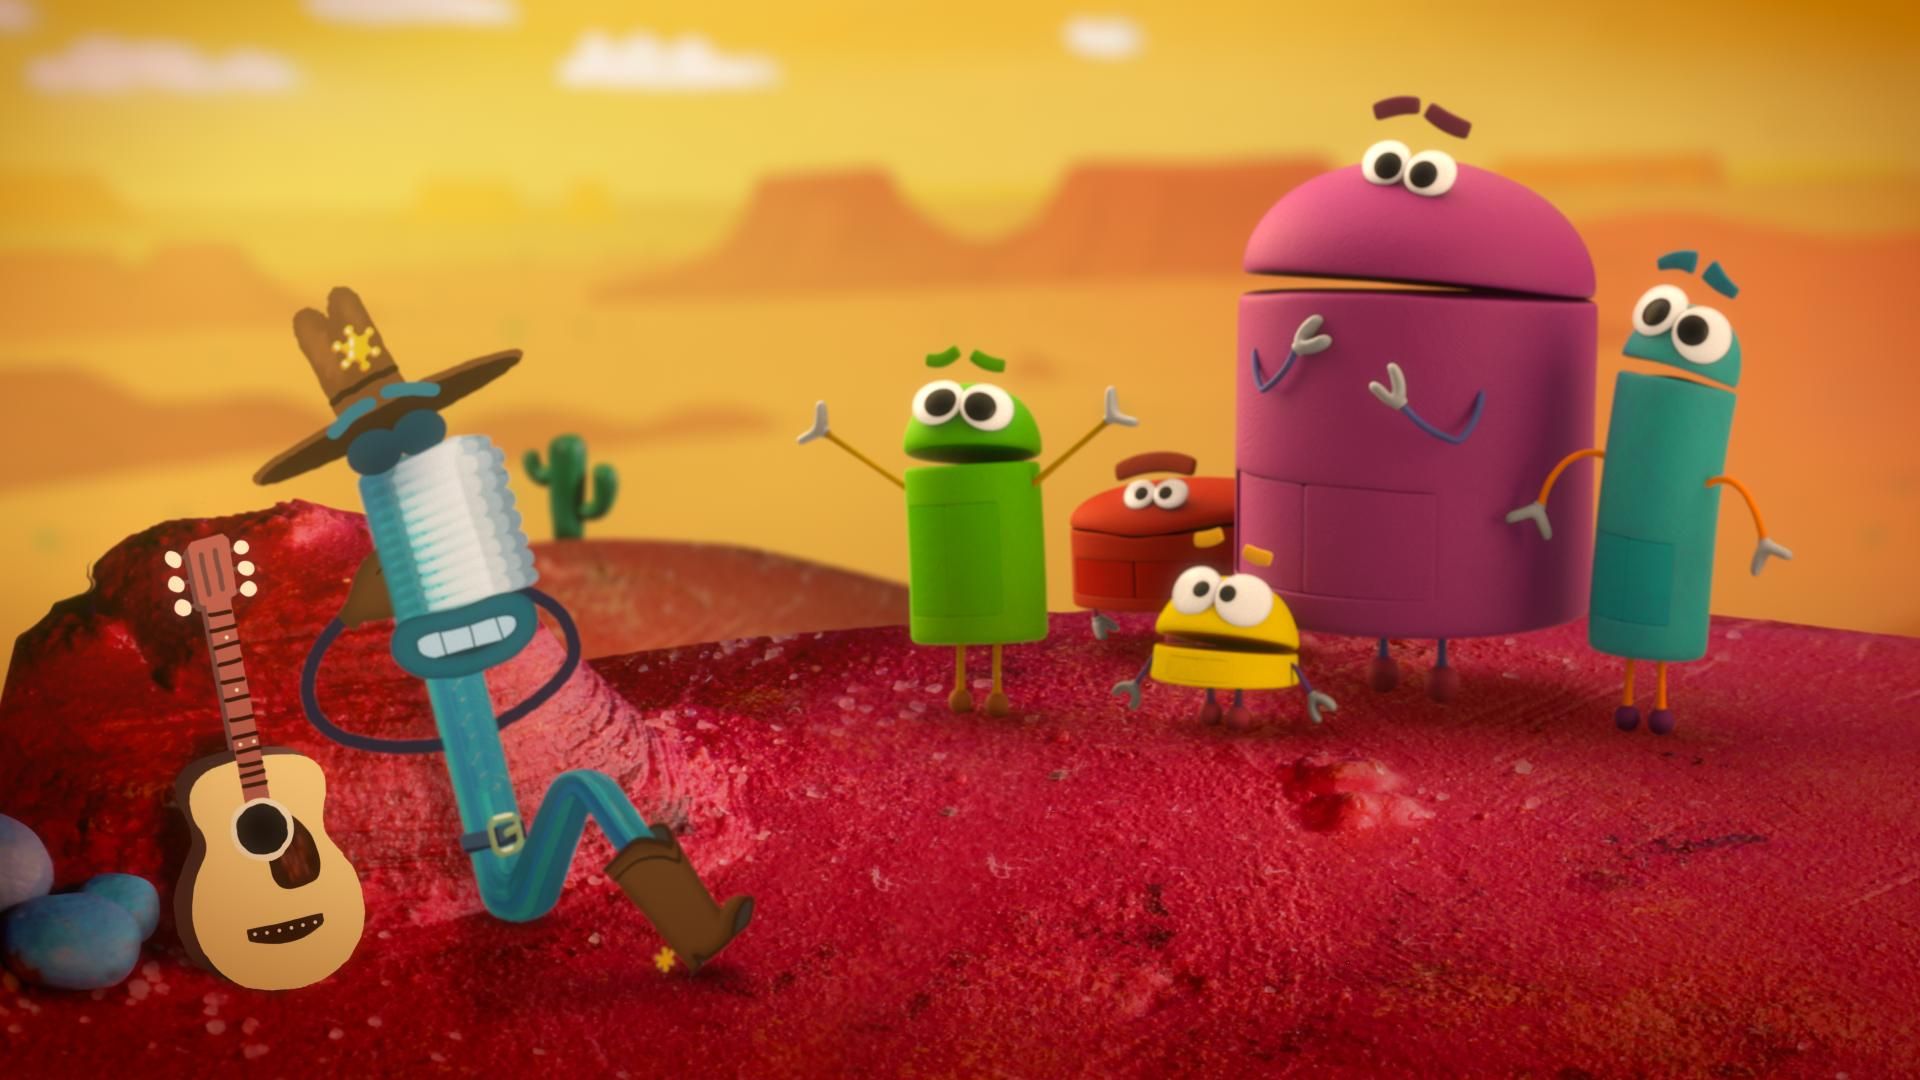 Ask the StoryBots background